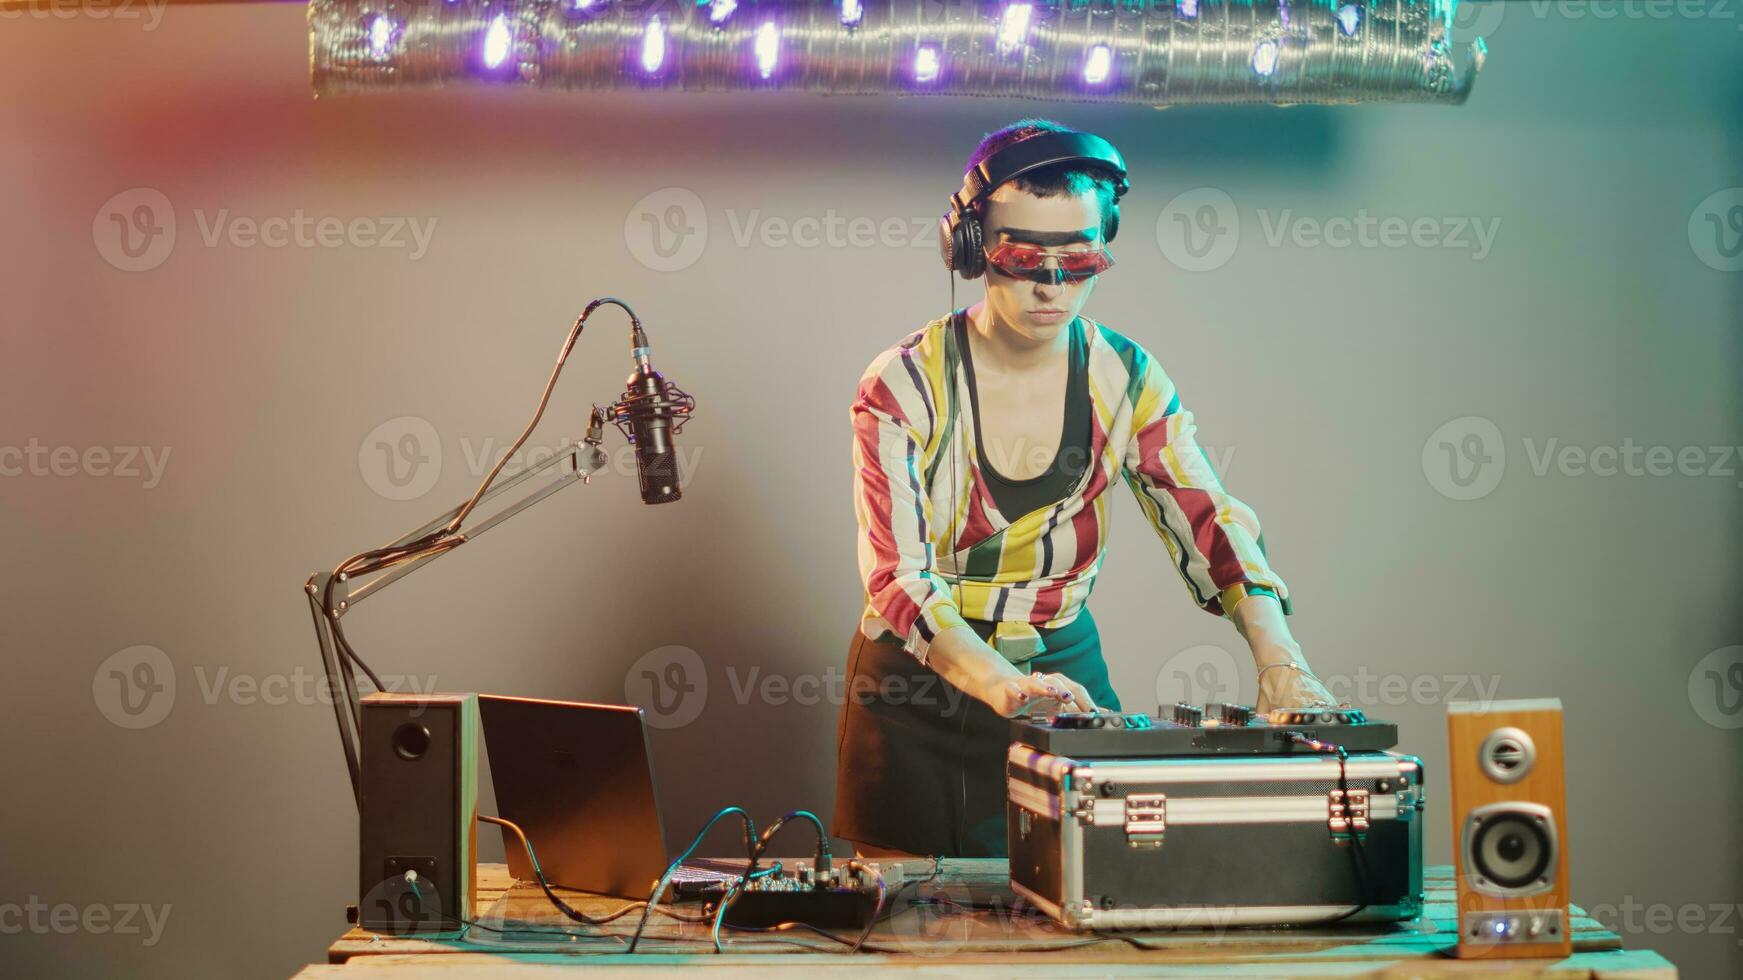 Disc jockey gives thumbs down on stage after mixing stereo sounds at turntables, showing dislike and disapproval sign while she uses mixer keys. Expressing rejection and disagreement. Tripod shot. photo